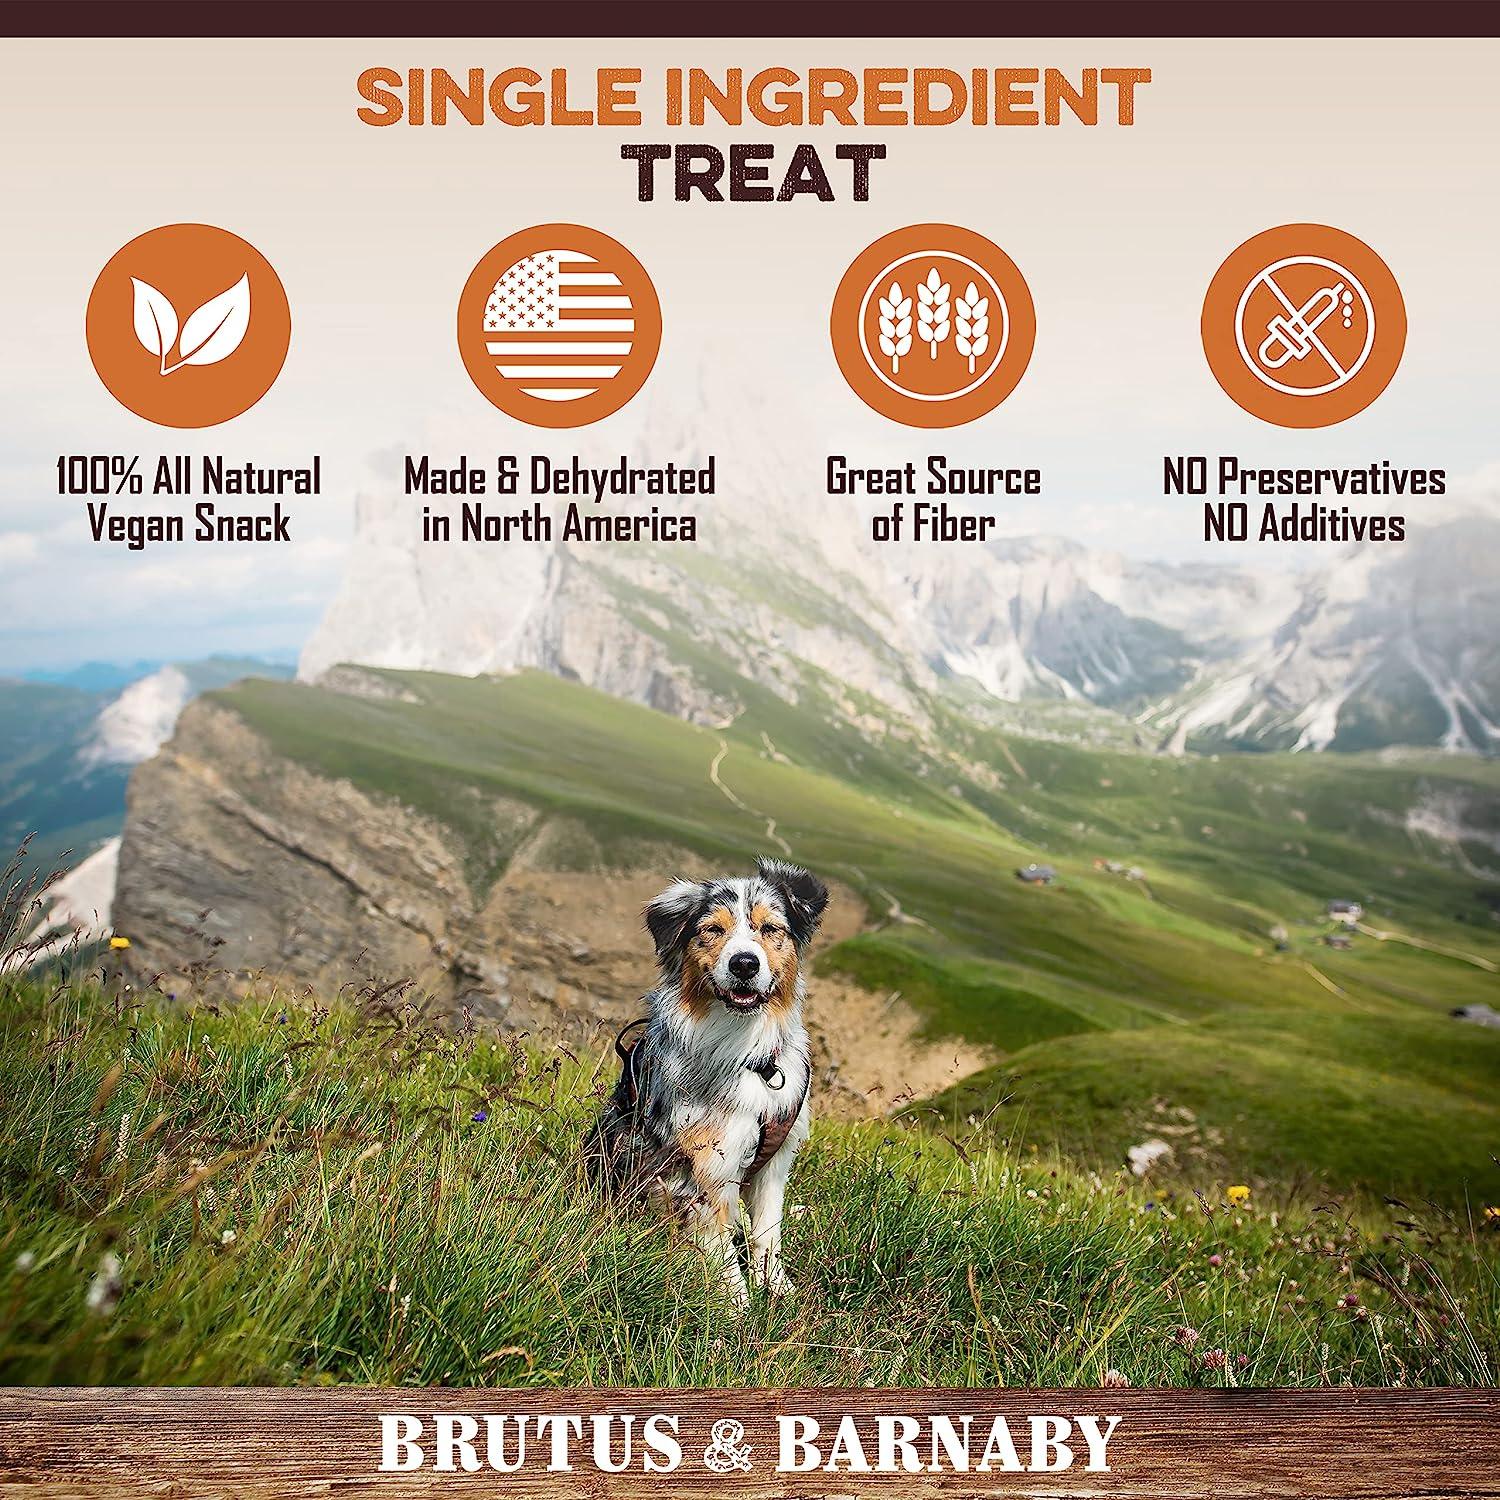 Sweet Potato Fries For Dogs - Brutus & Barnaby